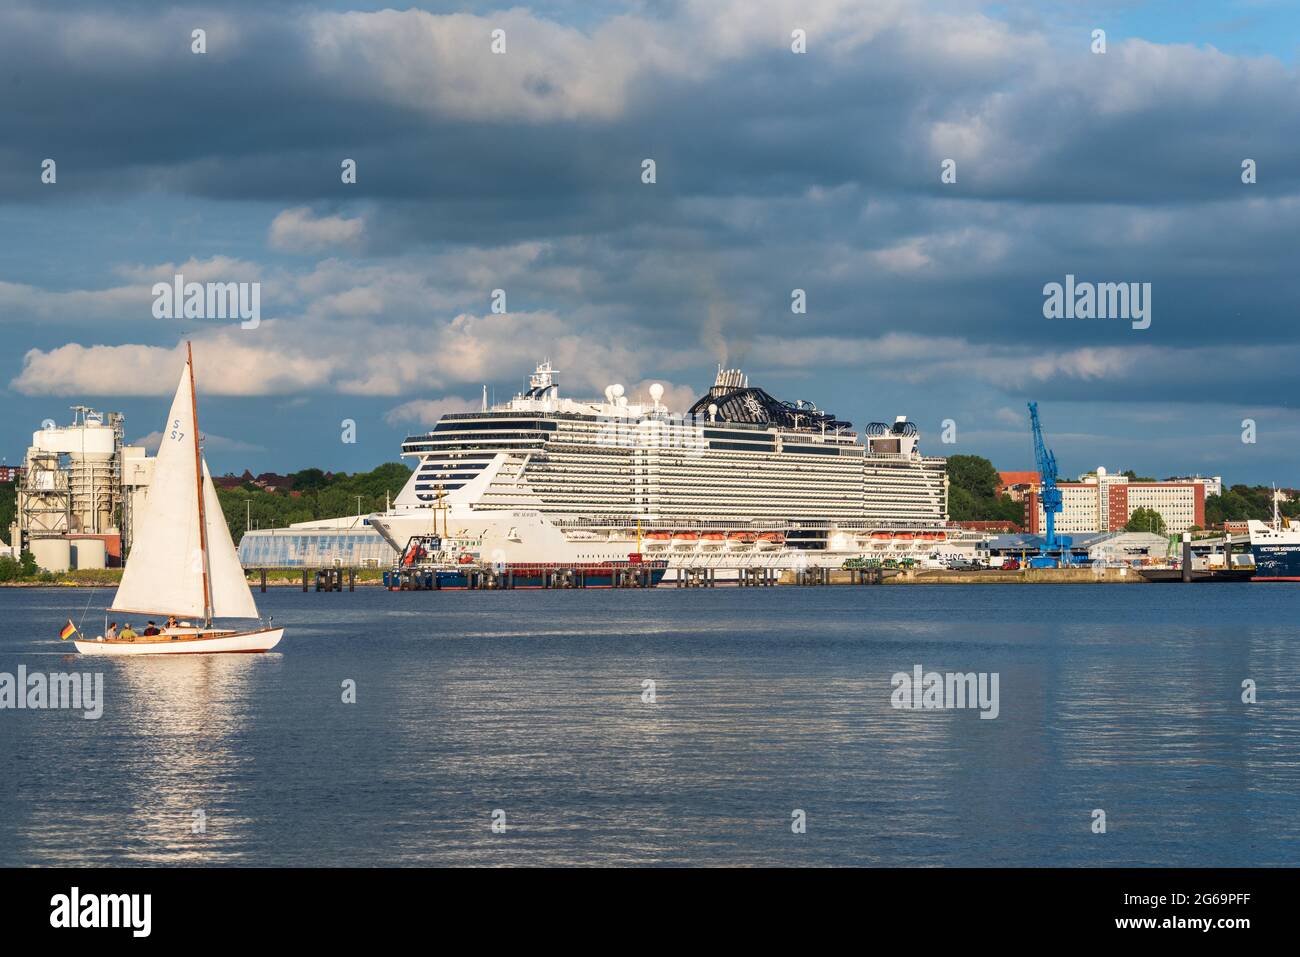 Luxus Schiff High Resolution Stock Photography and Images - Alamy